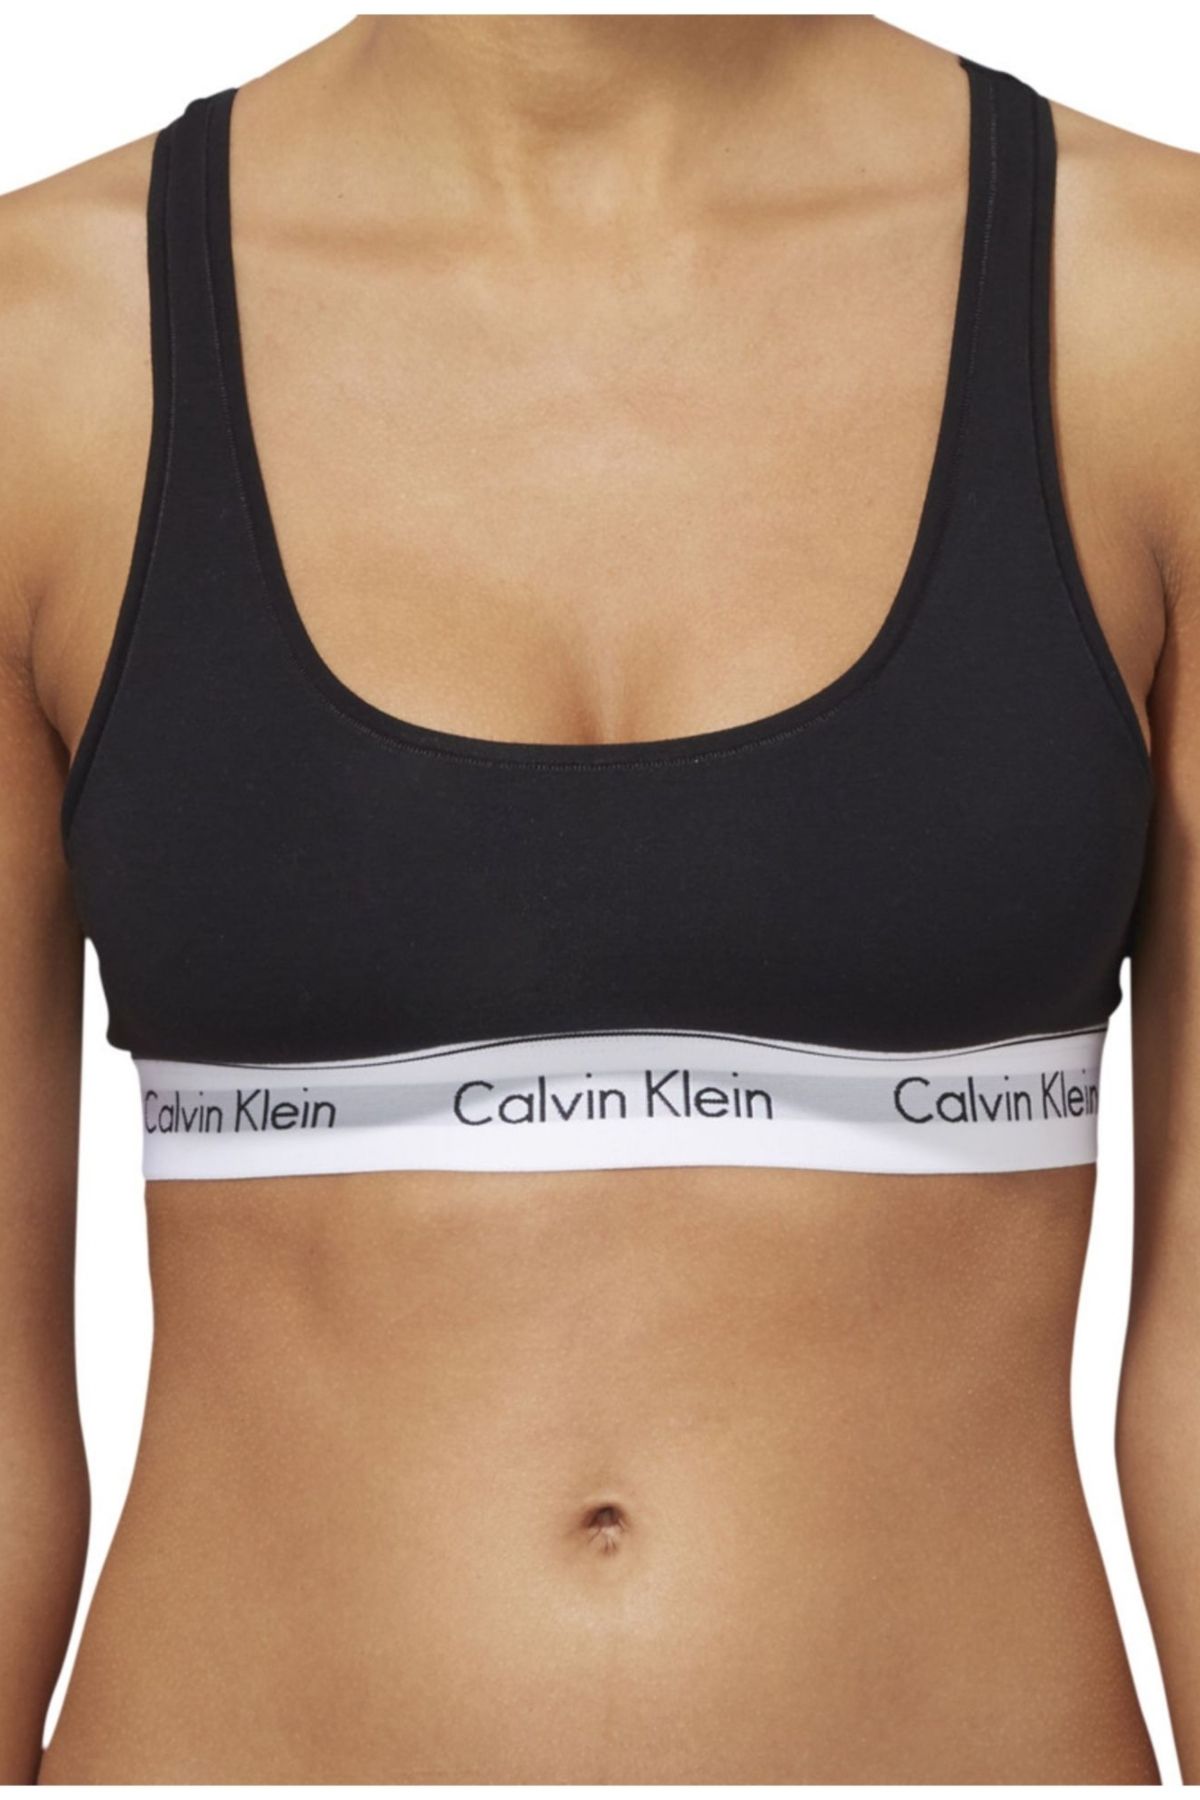 Calvin Klein Women's Black Sports Bra with Brand Logo and Elastic Band  Suitable for Daily Use F3785e-001 - Trendyol